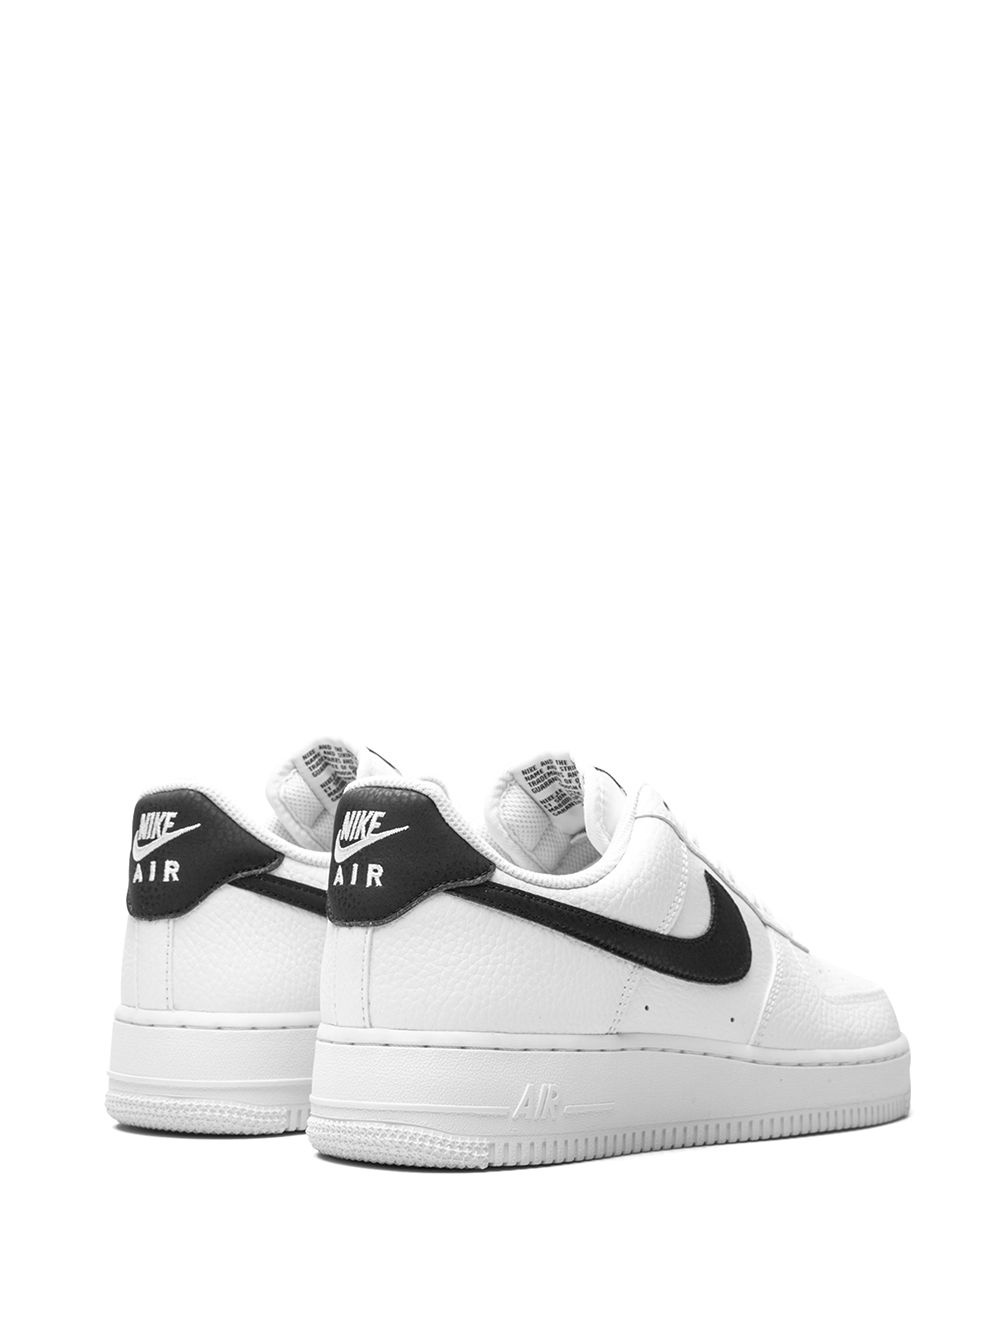 Air Force 1 Low '07 "White/Black" sneakers - 3